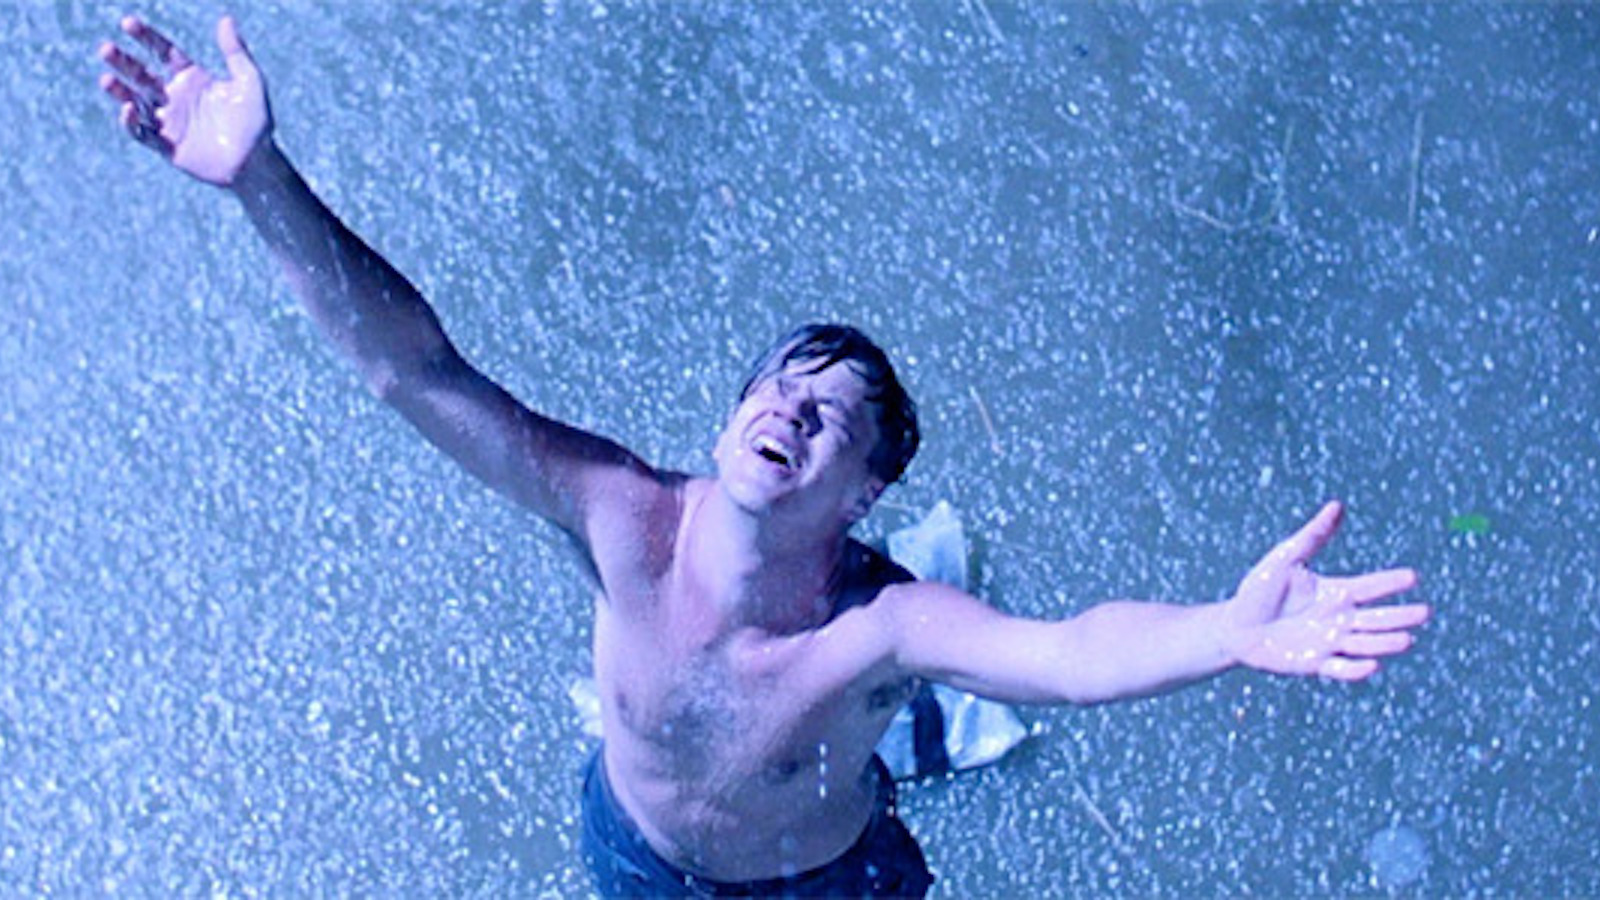 The Mist And The Shawshank Redemption Are Two Very Different Films About The Importance Of Hope